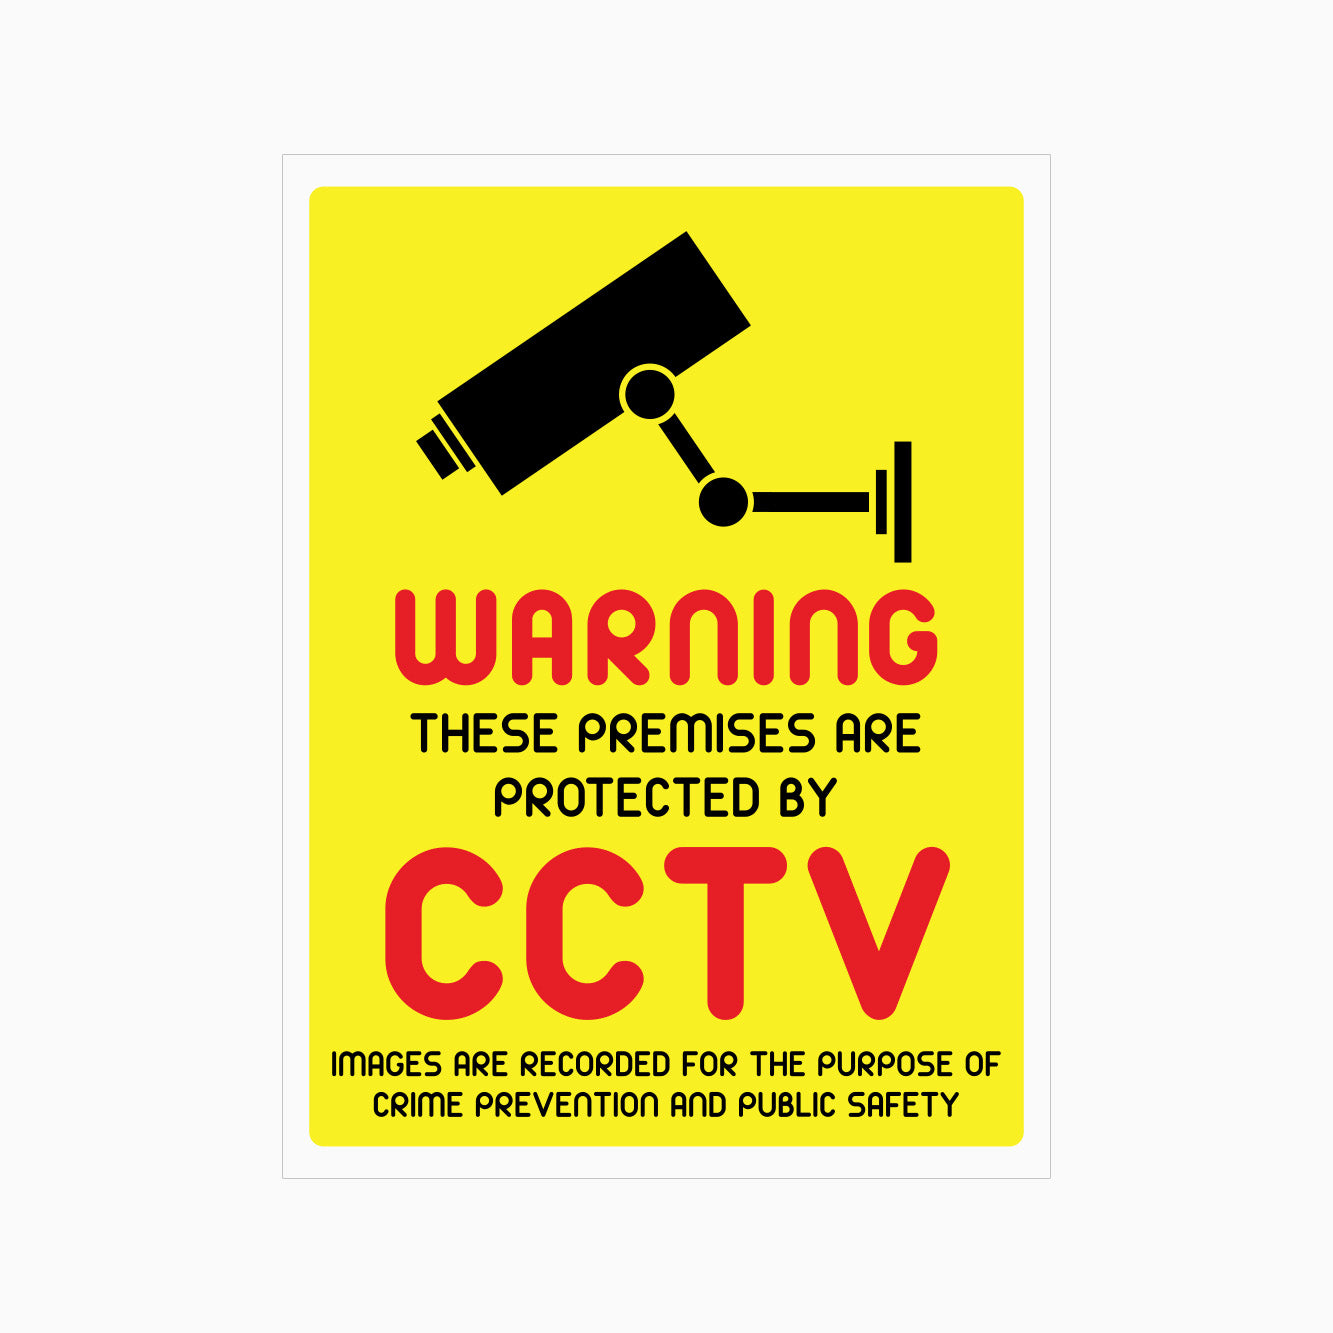 WARNING THESE PREMISES ARE PROTECTED BY CCTV. IMAGES ARE RECORDED FOR THE PURPOSE OF CRIME PREVENTION AND PUBLIC SAFETY SIGN